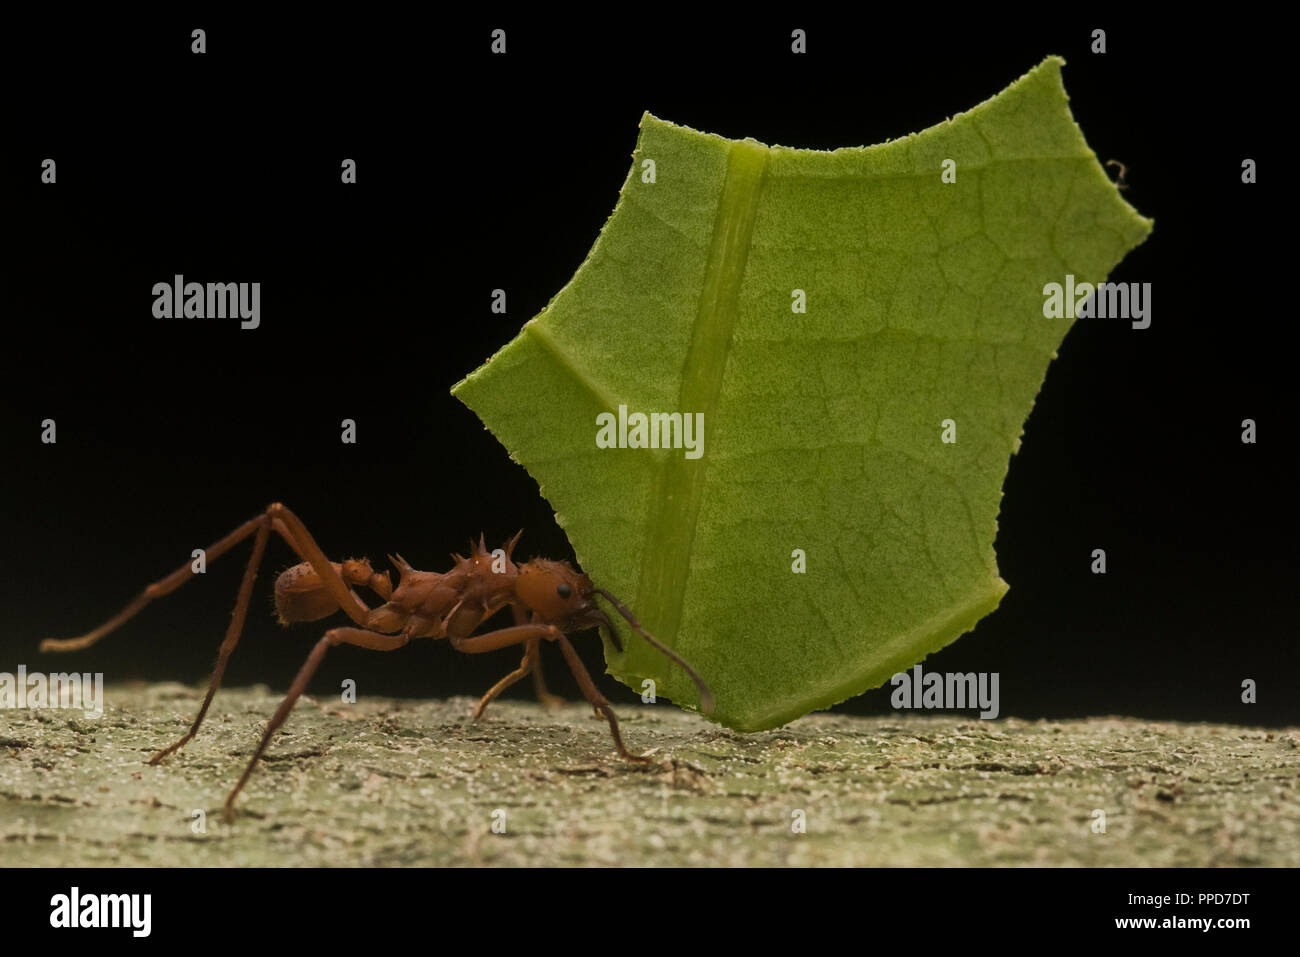 A leaf cutting ant (Atta cephalotes) transporting a cut segment of a leaf back to its nest in the Amazon rainforest. Stock Photo